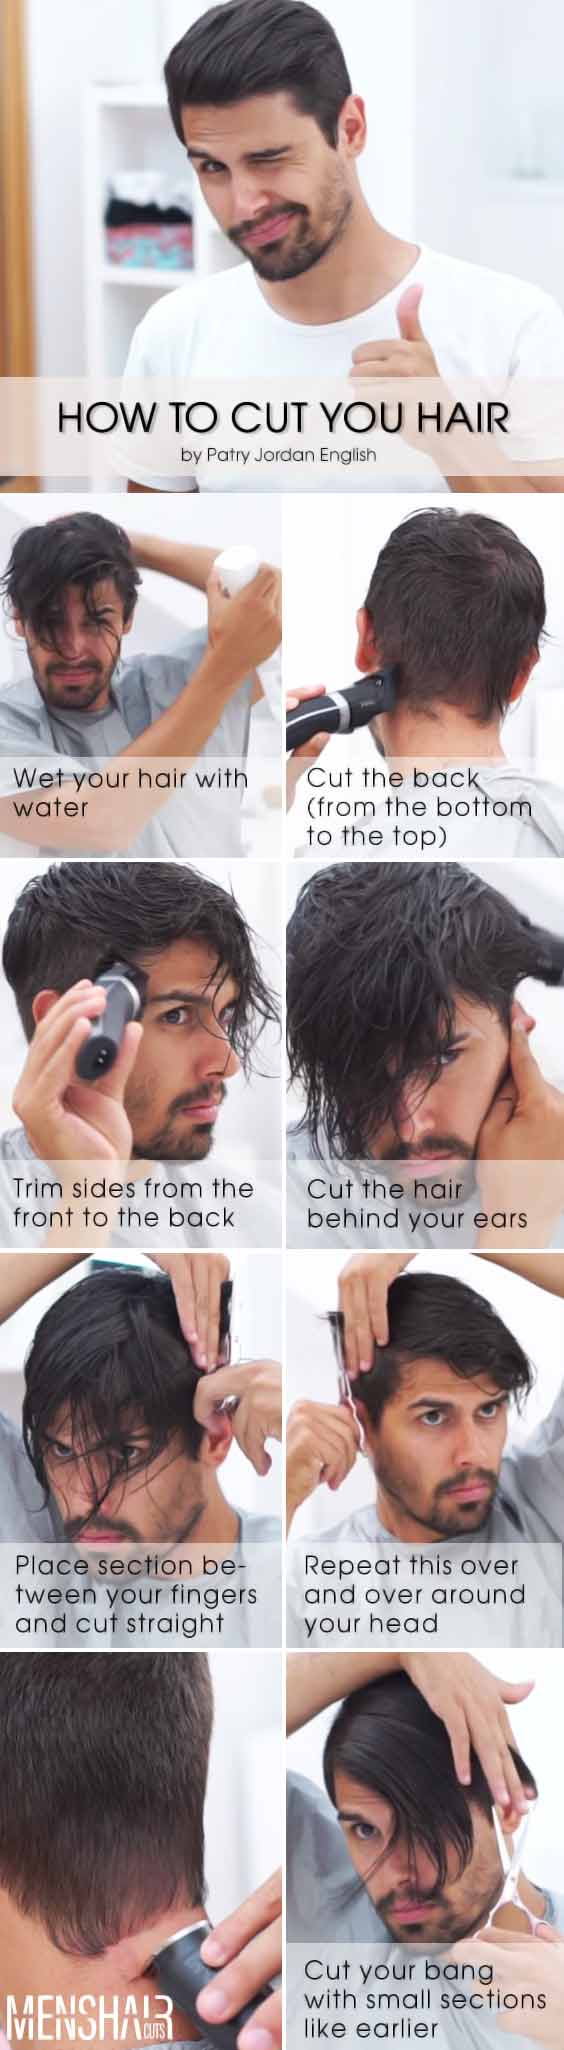 Cutting Your Hair At Home: How To #tutorial